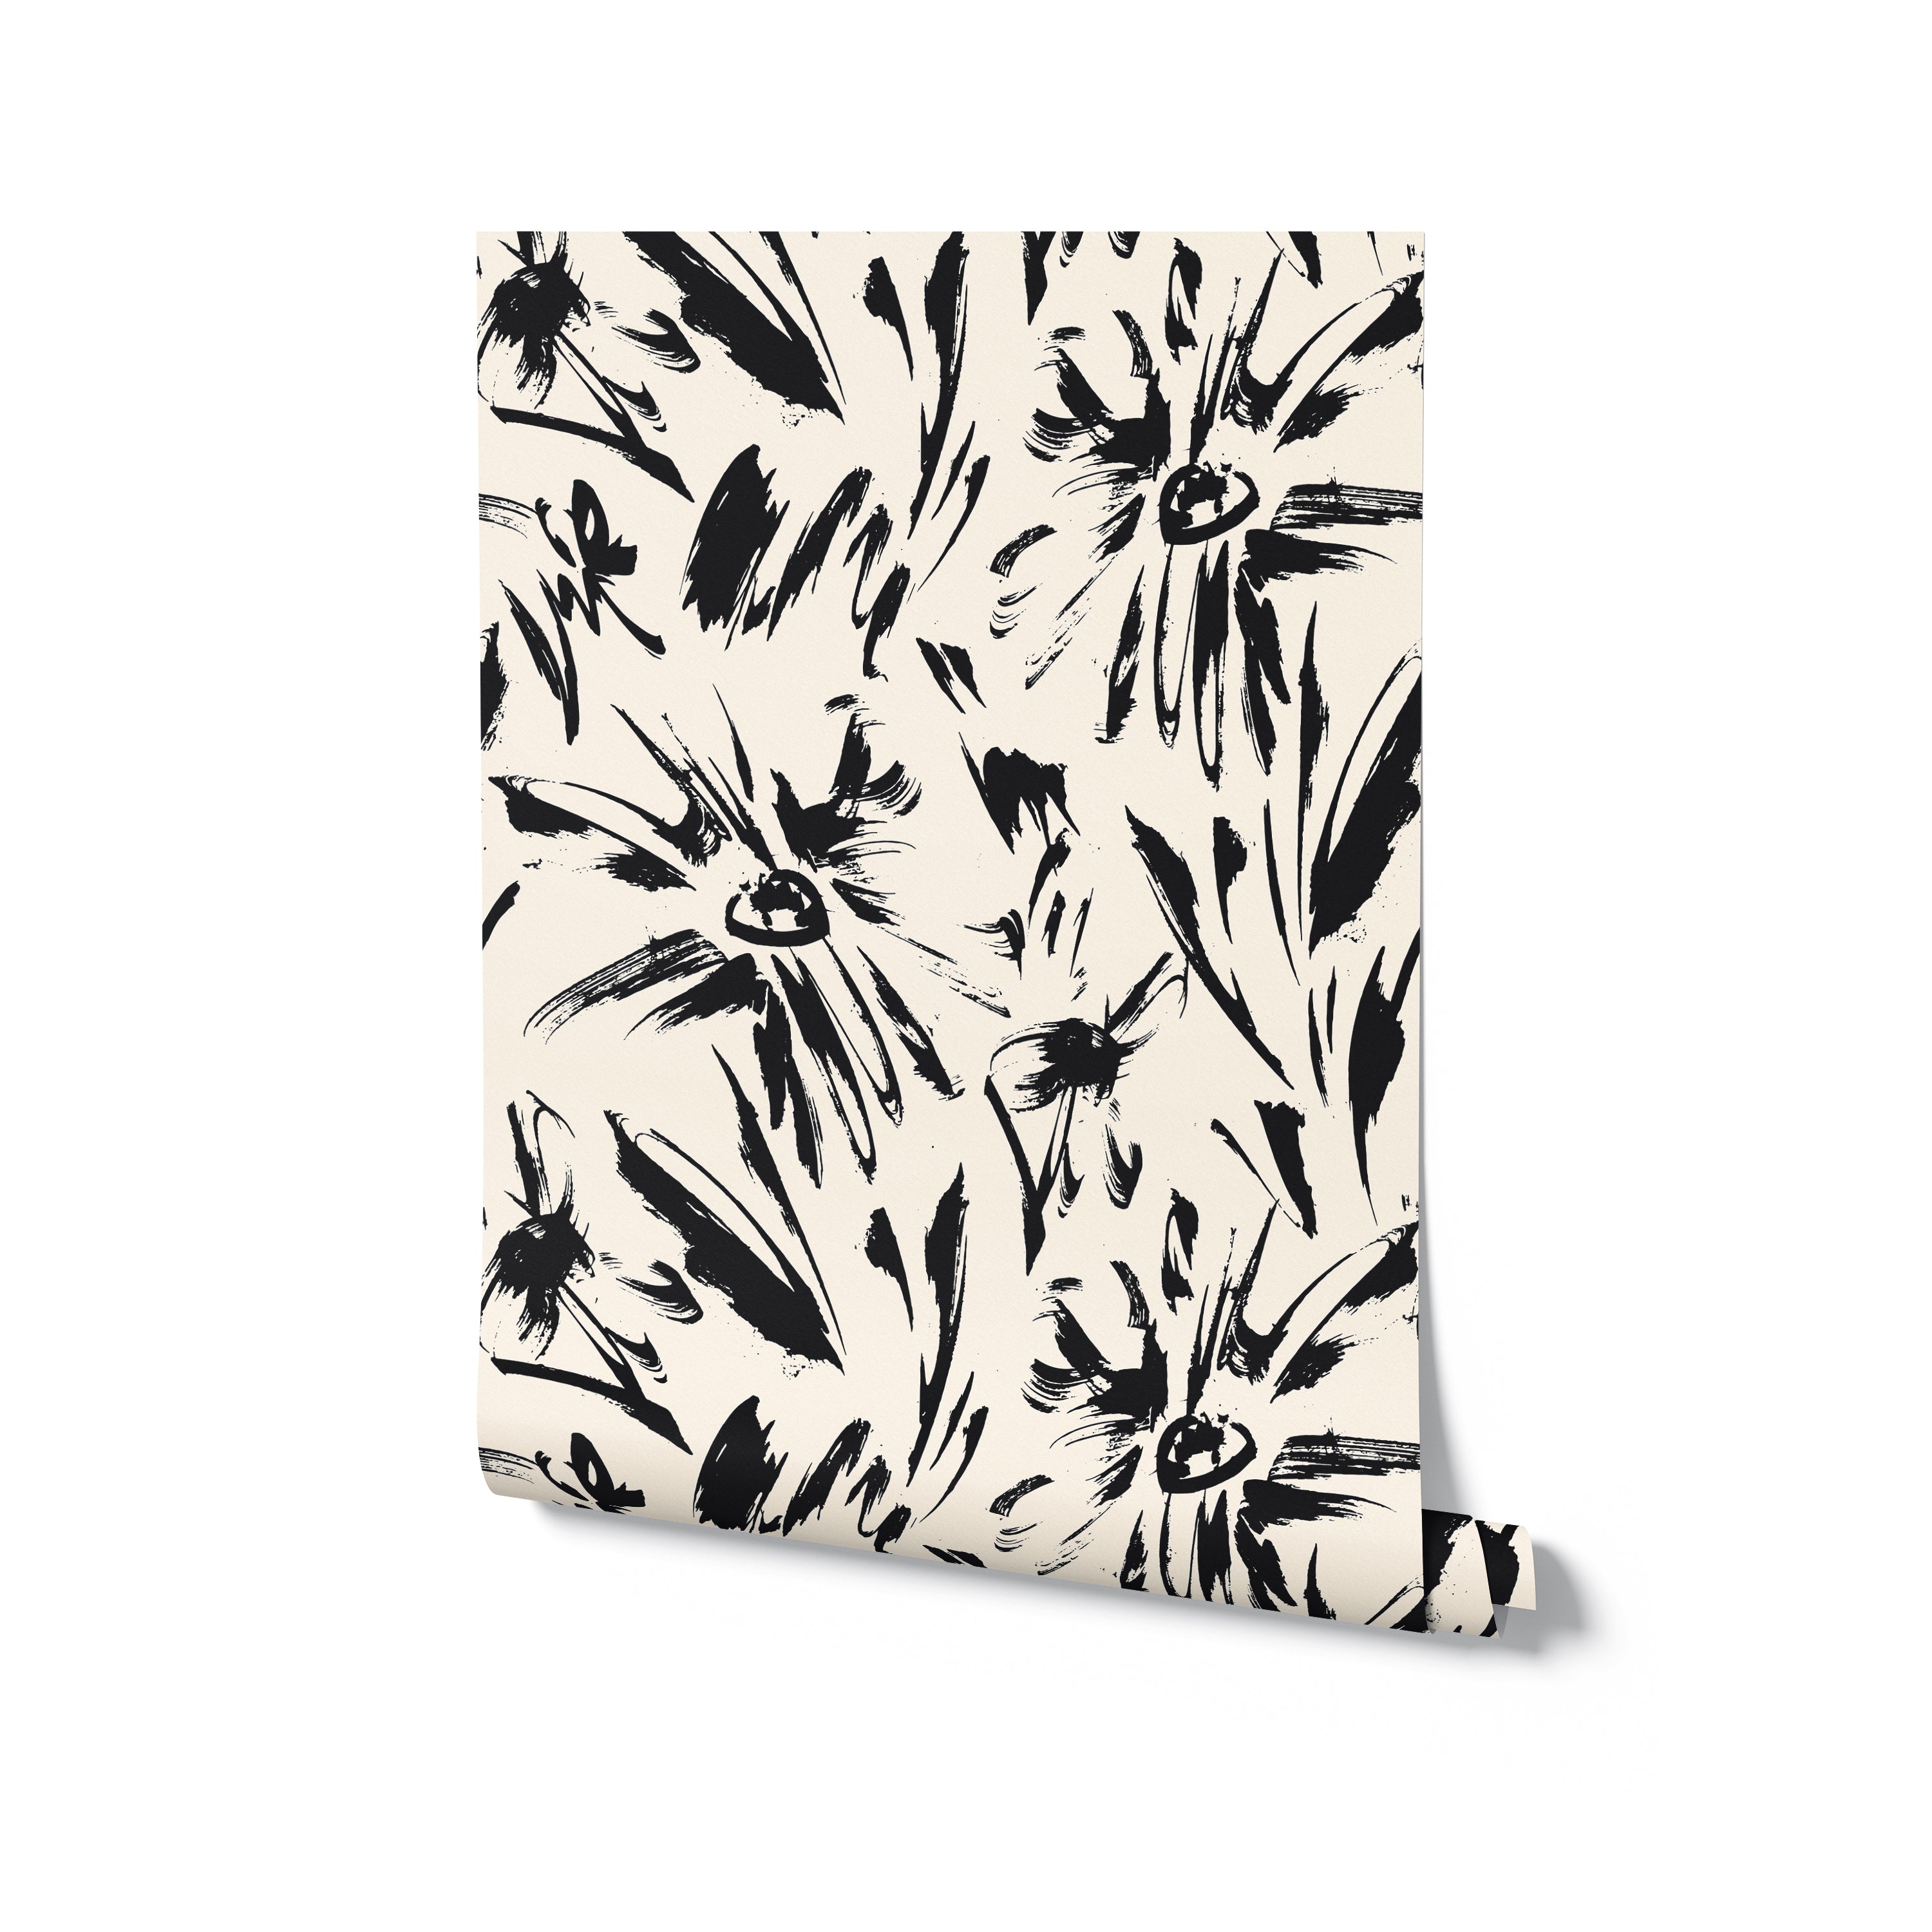 A roll of Modern Floral Sketch Wallpaper - 25", partially unrolled to reveal the distinctive black abstract floral designs on a clean white background. This bold and artistic wallpaper is perfect for making a statement in any modern or eclectic interior design.